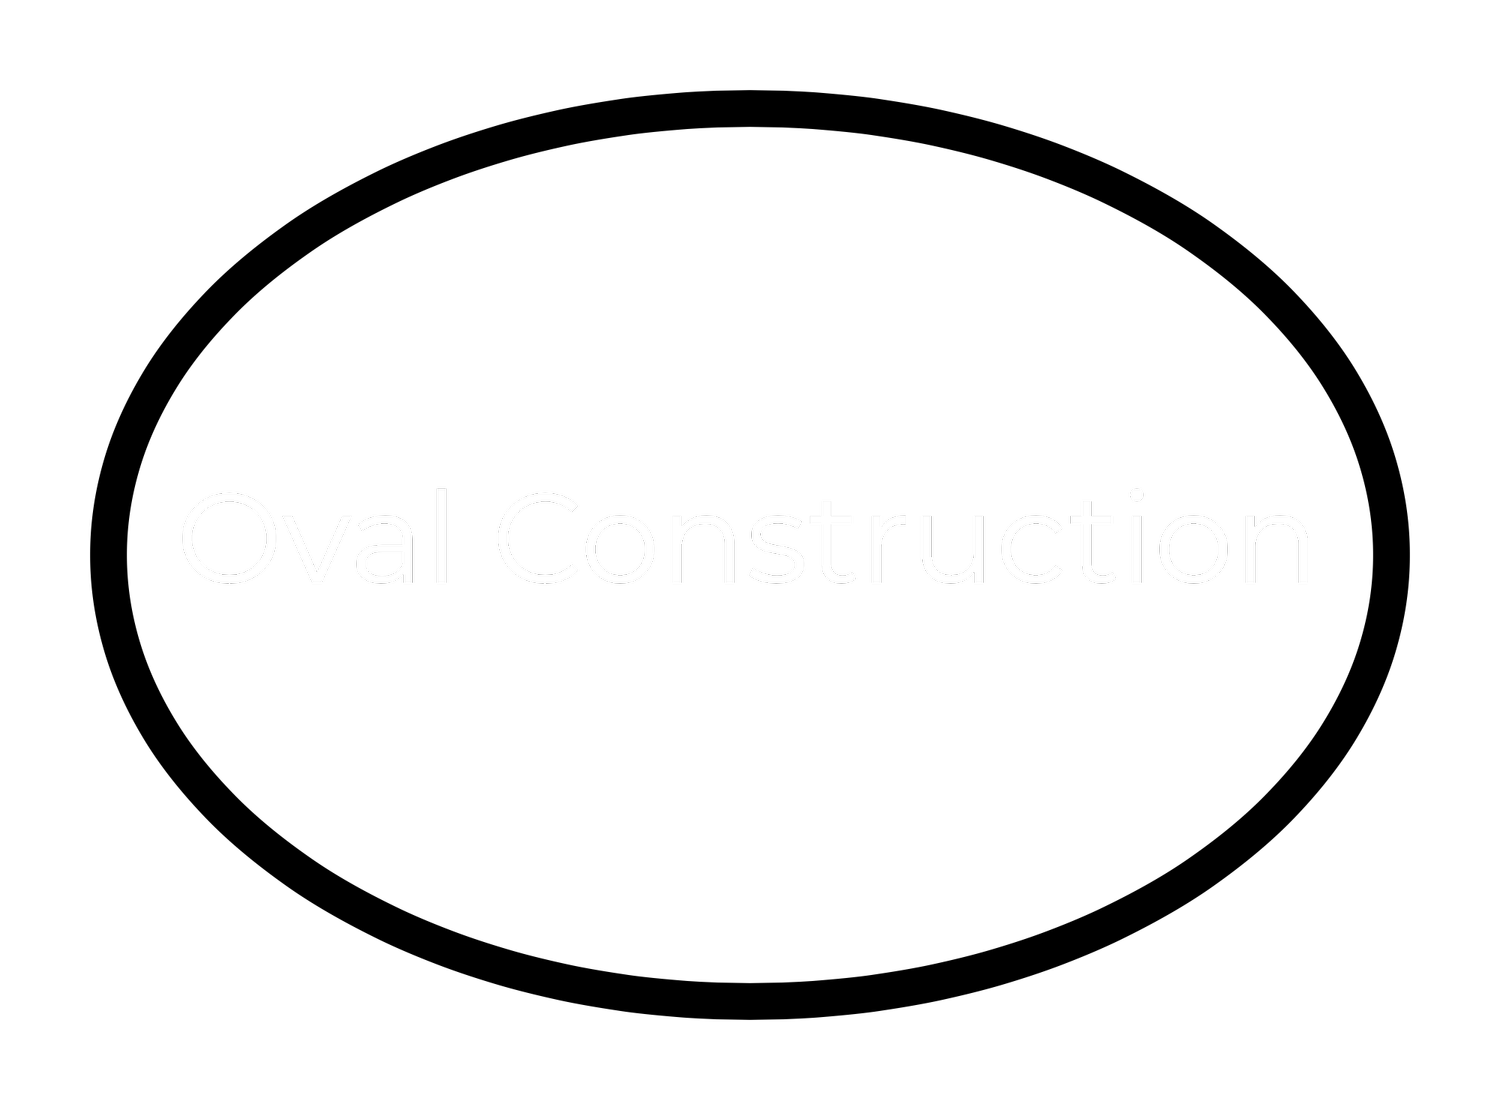 Oval Construction